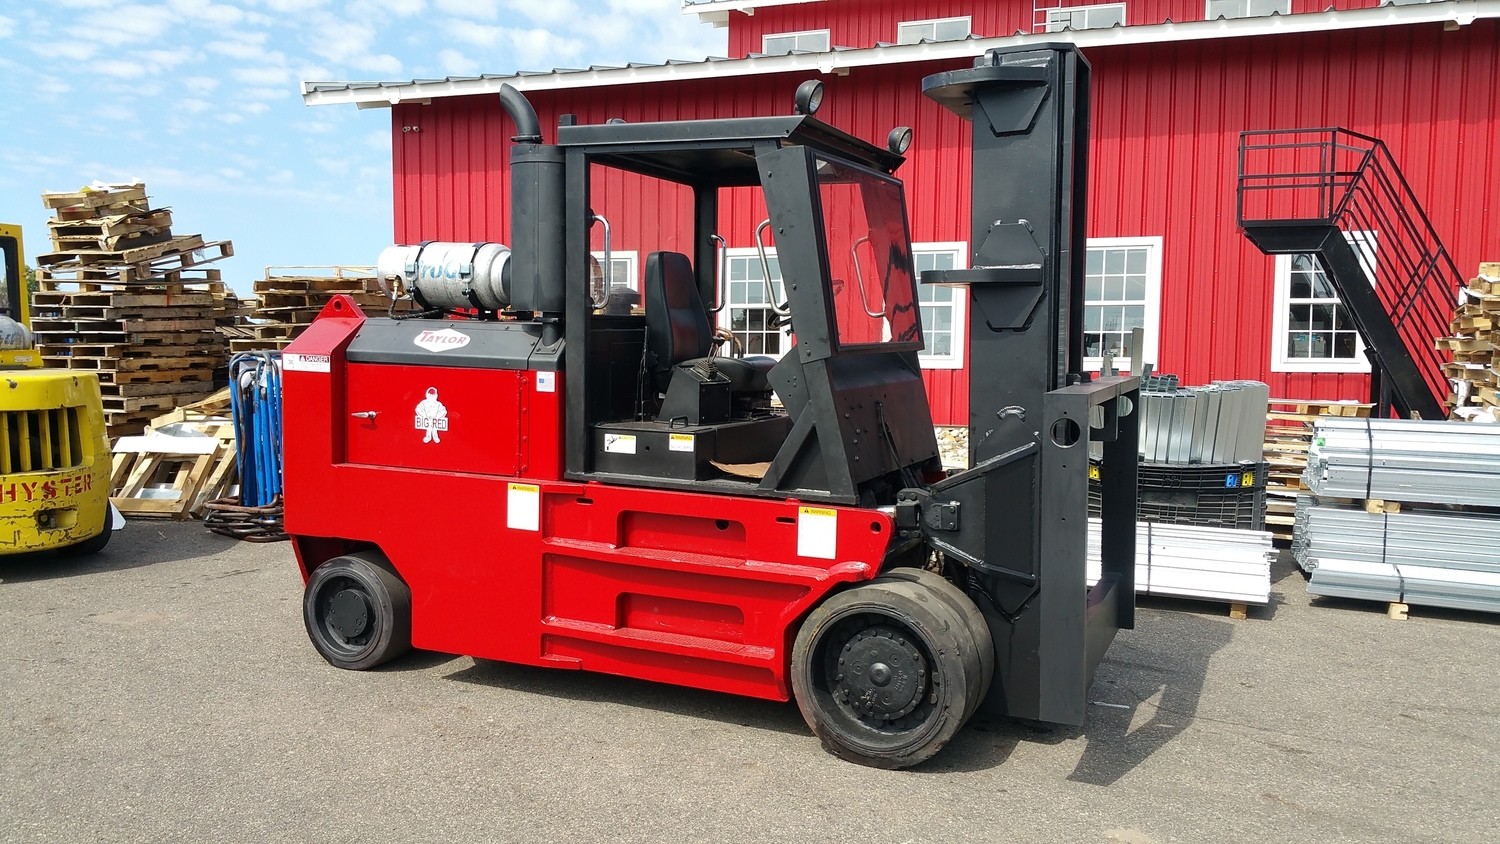 30,000lb. Capacity @ 36" Load Center Taylor Hard-Tire Forklifts (3 Available) For Sale